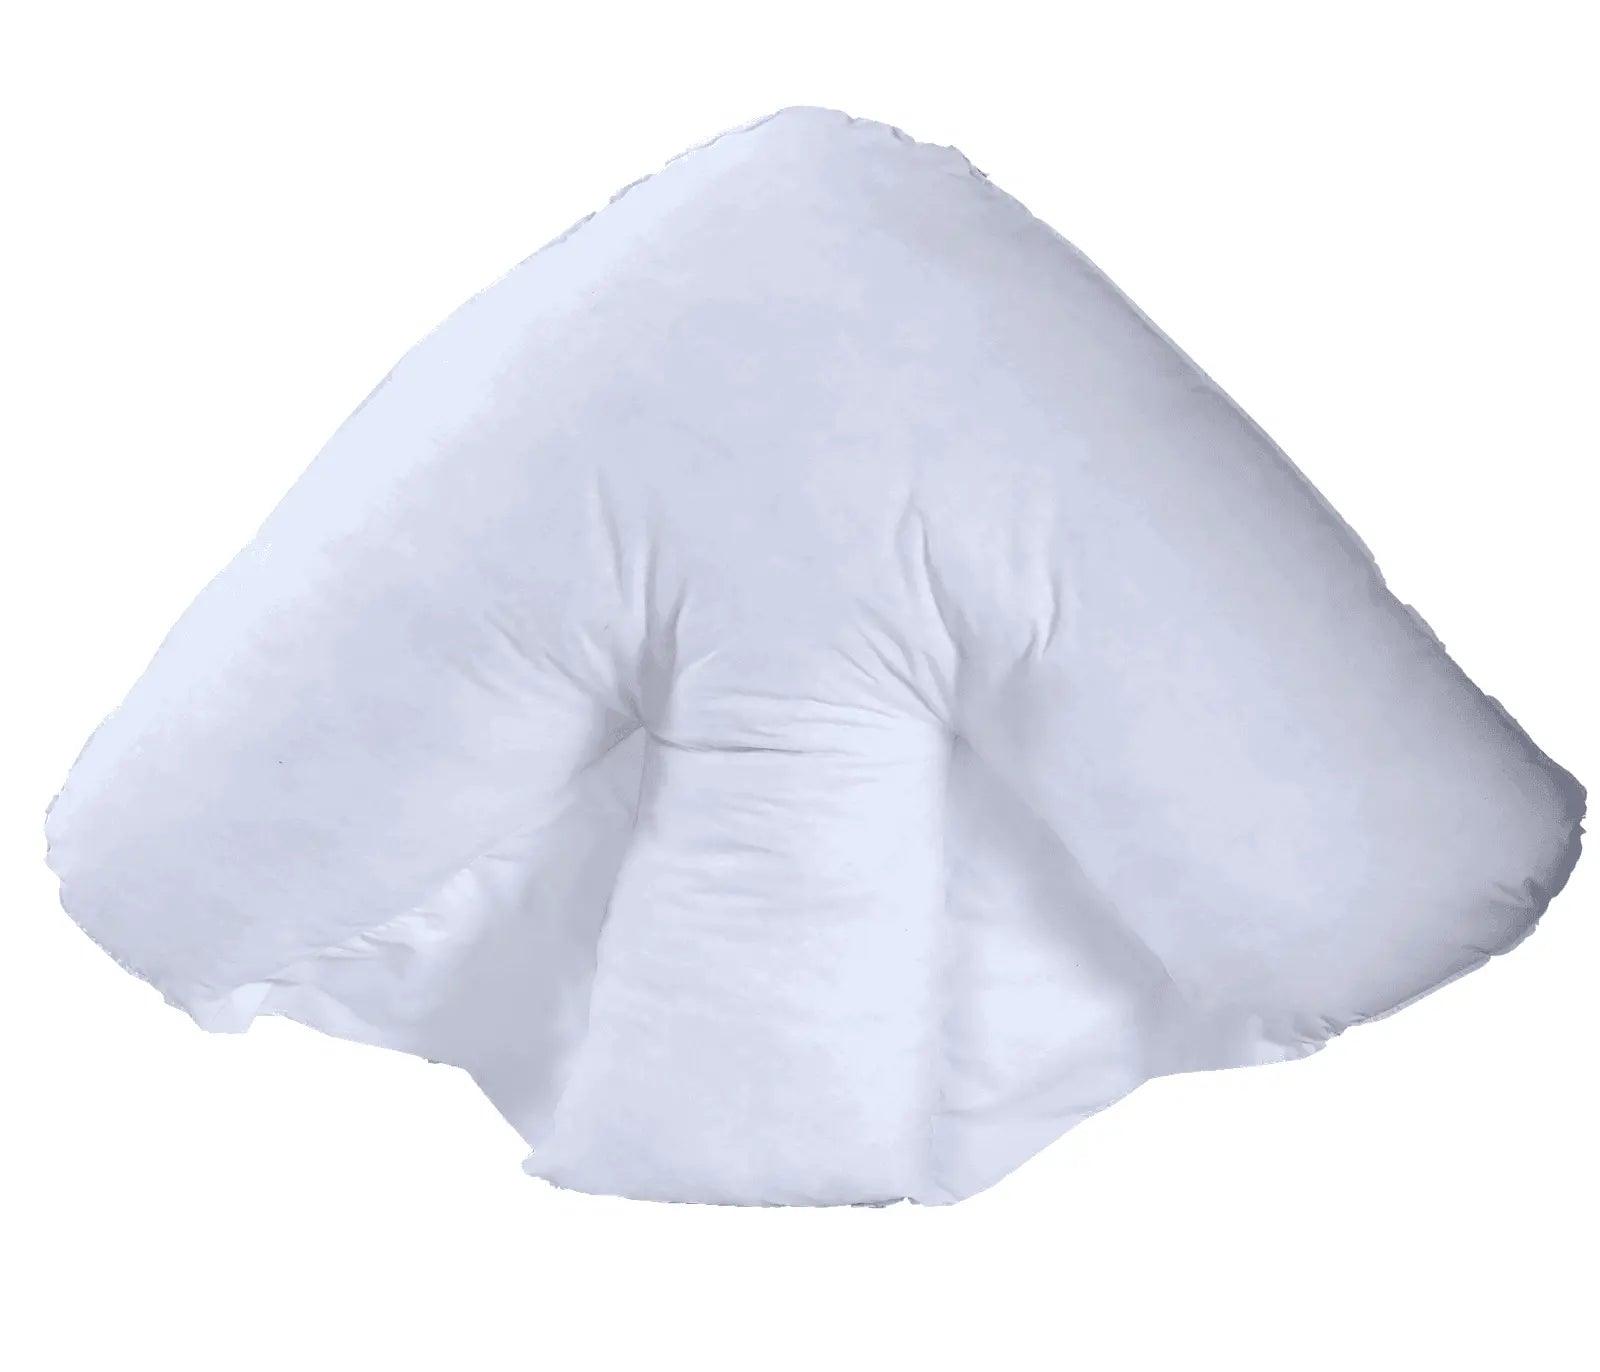 Batwing Pillow Hollowfibre Filled Orthopaedic Support for Back Neck Batwing Cushion - Arlinens